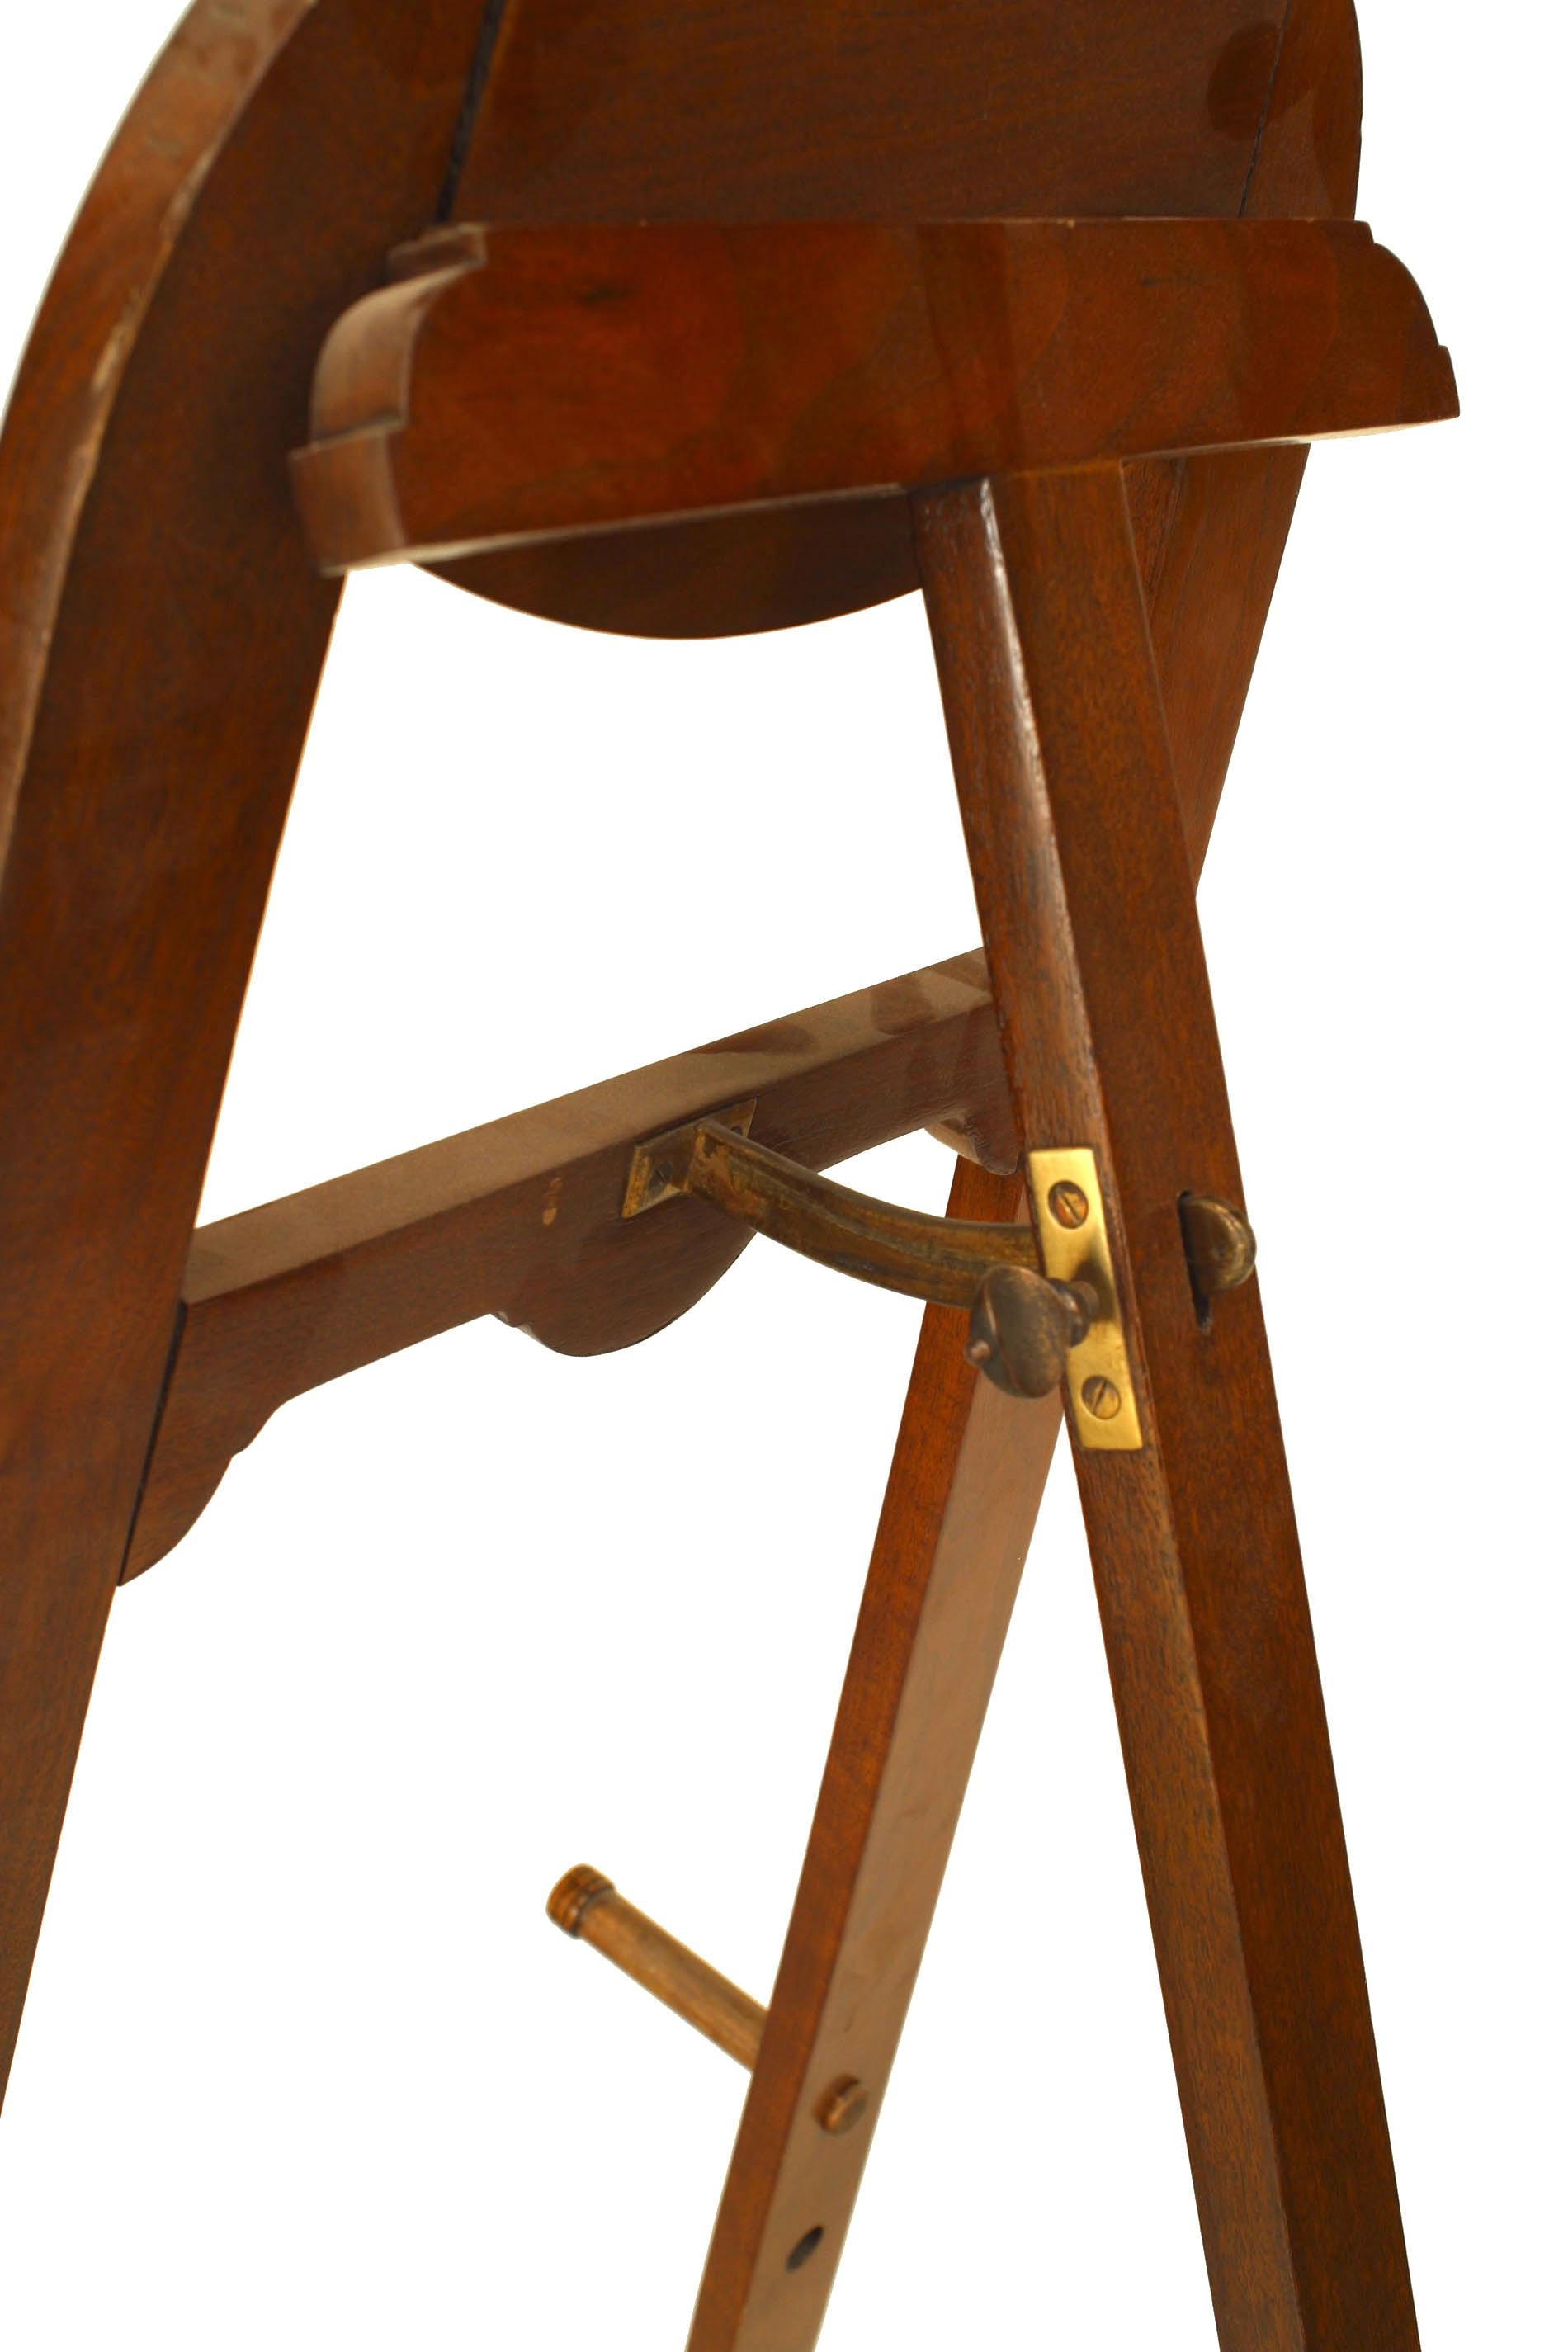 Arts and Crafts Aesthetic Movement Mahogany Easel For Sale